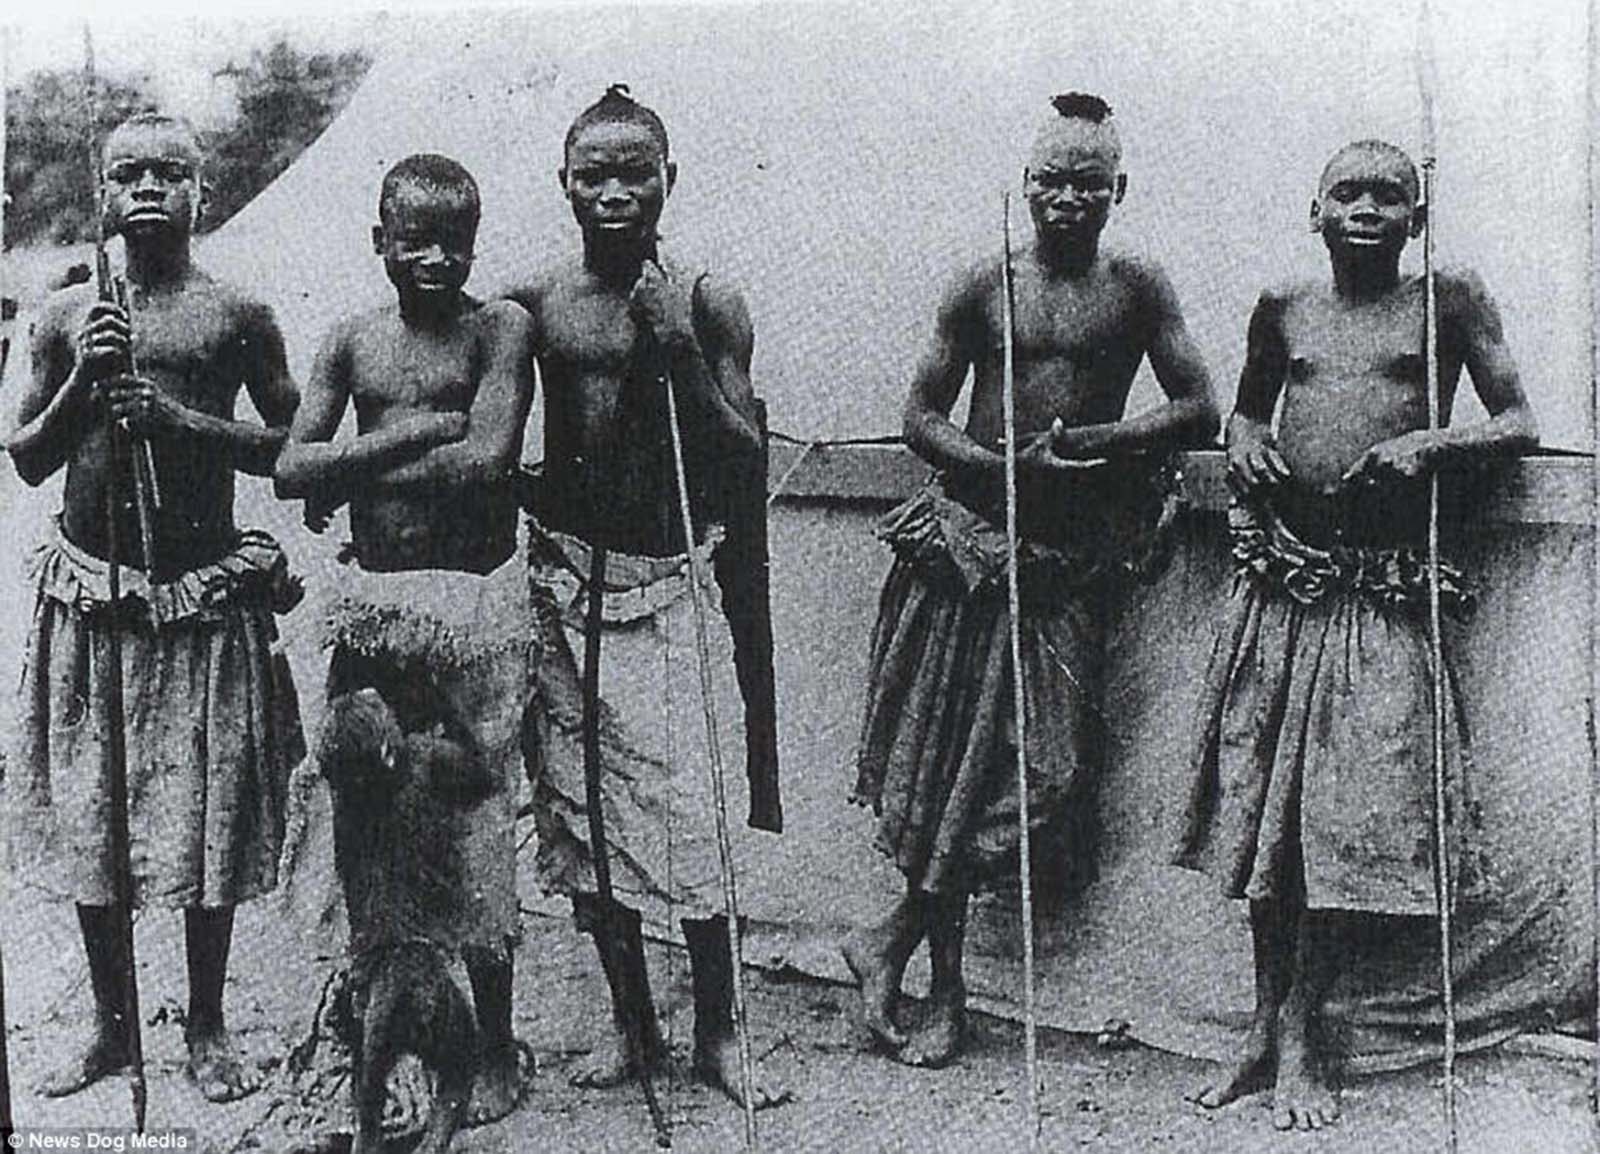 The dreadful treatment of Ota Benga (second from left), a Congolese man ‘exhibited’ in New York’s Bronx Zoo in 1906, sparked outrage and he was eventually released. But six years later he tragically took his own life after being unable to assimilate into